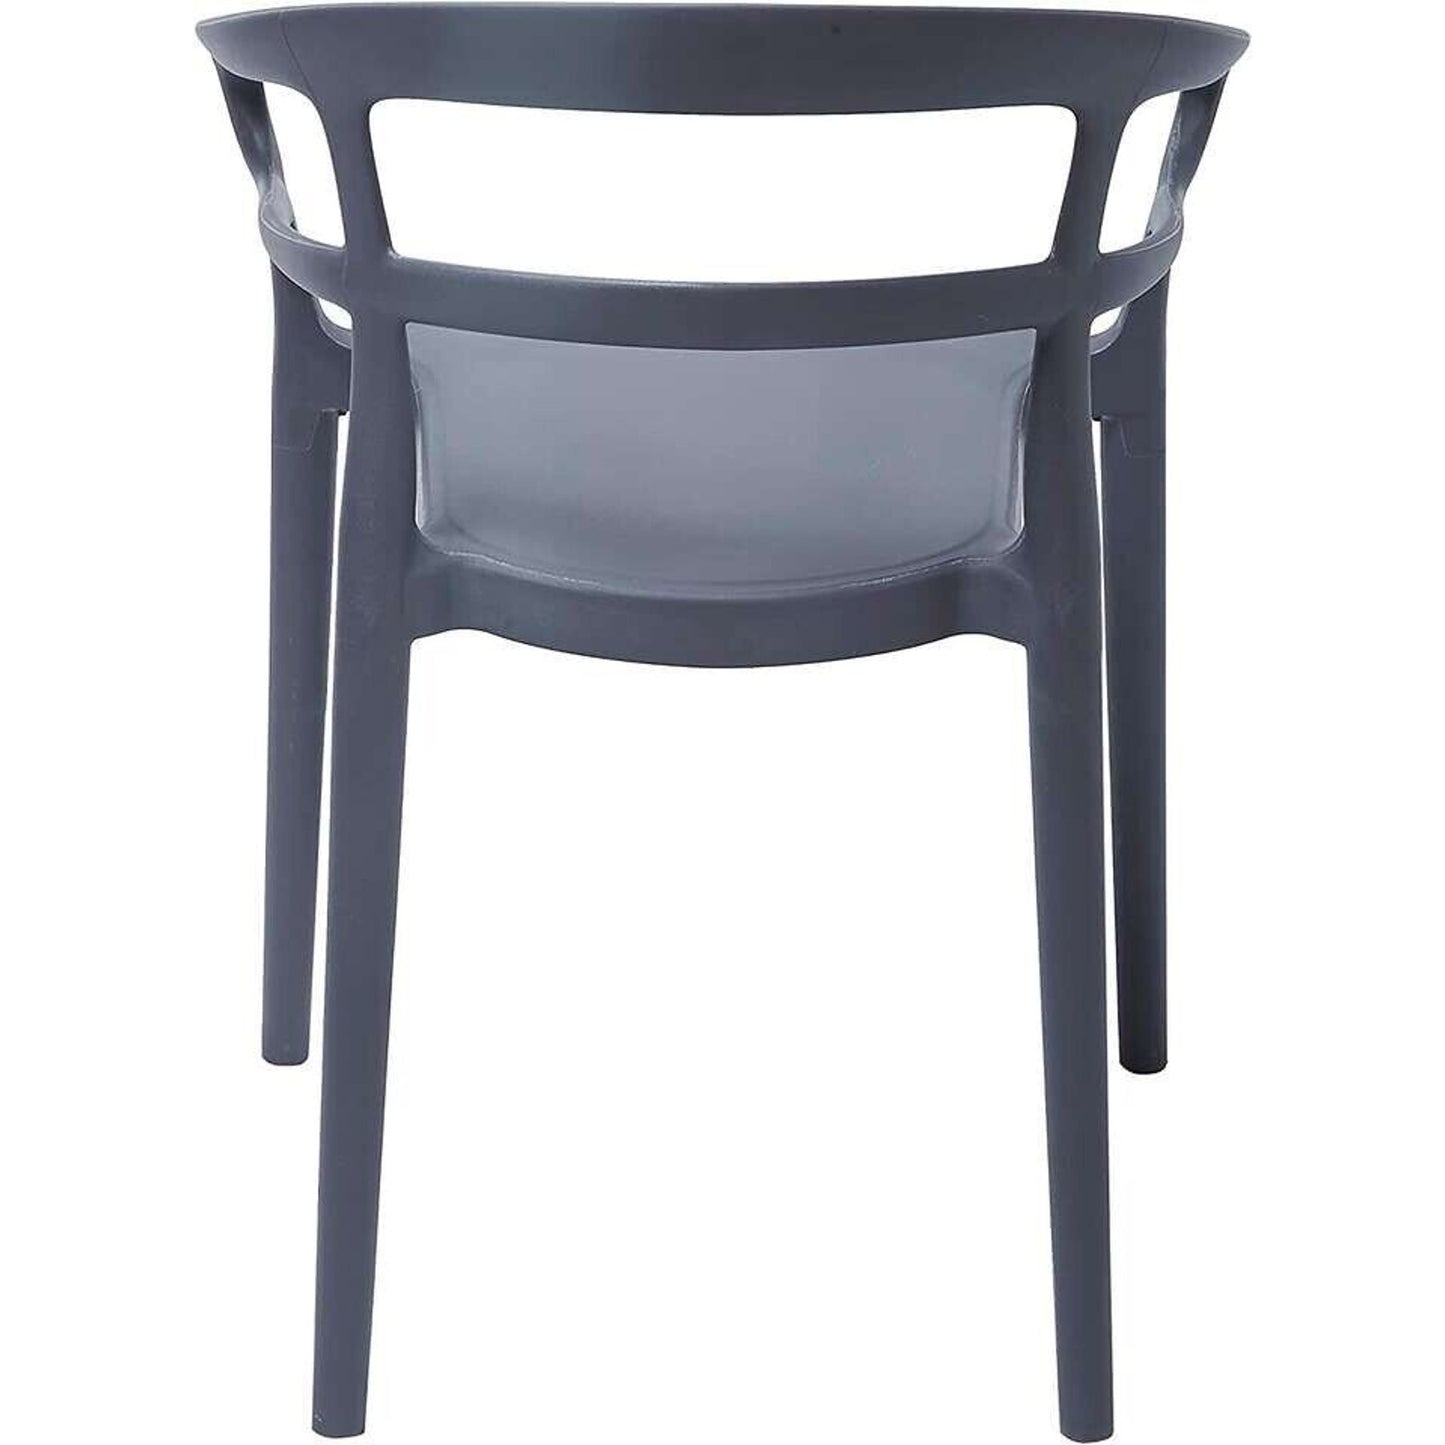 Amazon Basics Curved Back Grey Chairs, 2-Pack, Indoor/Outdoor, Solid Resin Frame